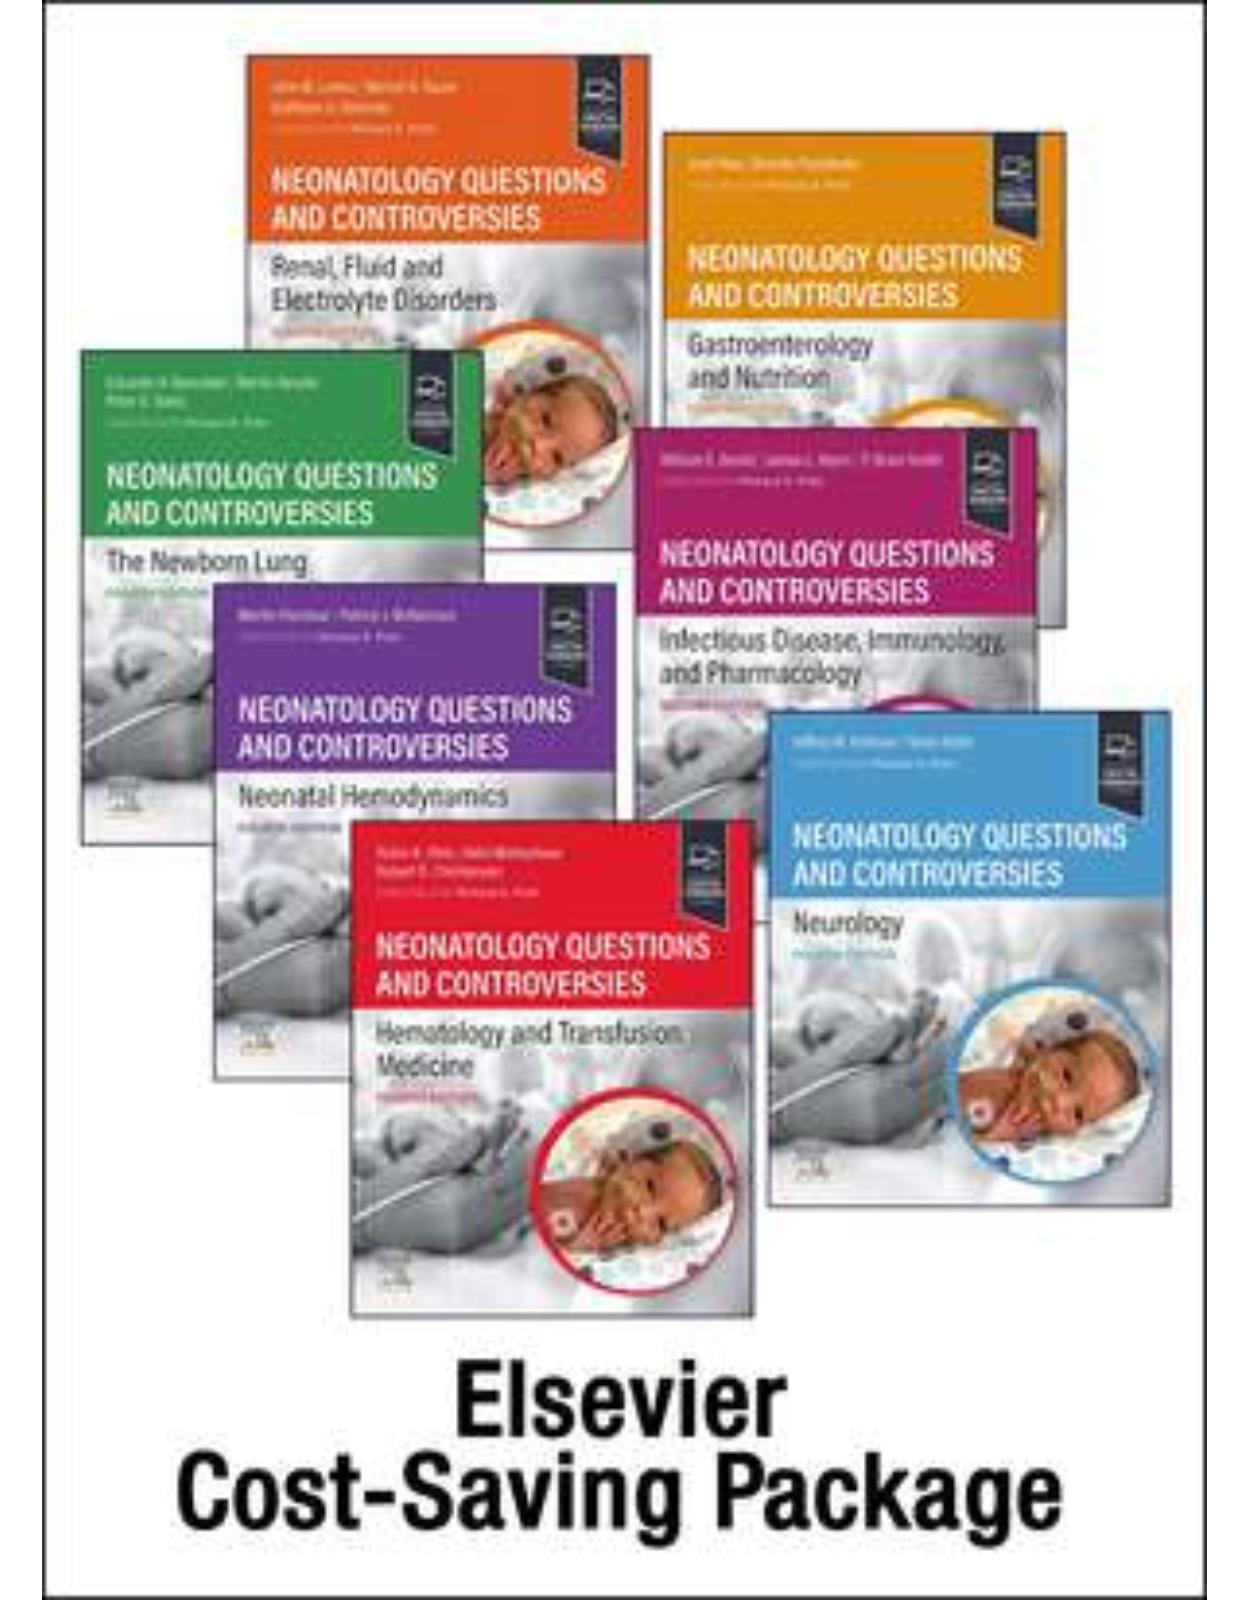 Neonatology: Questions and Controversies Series 7-volume Series Package, 4th Edition